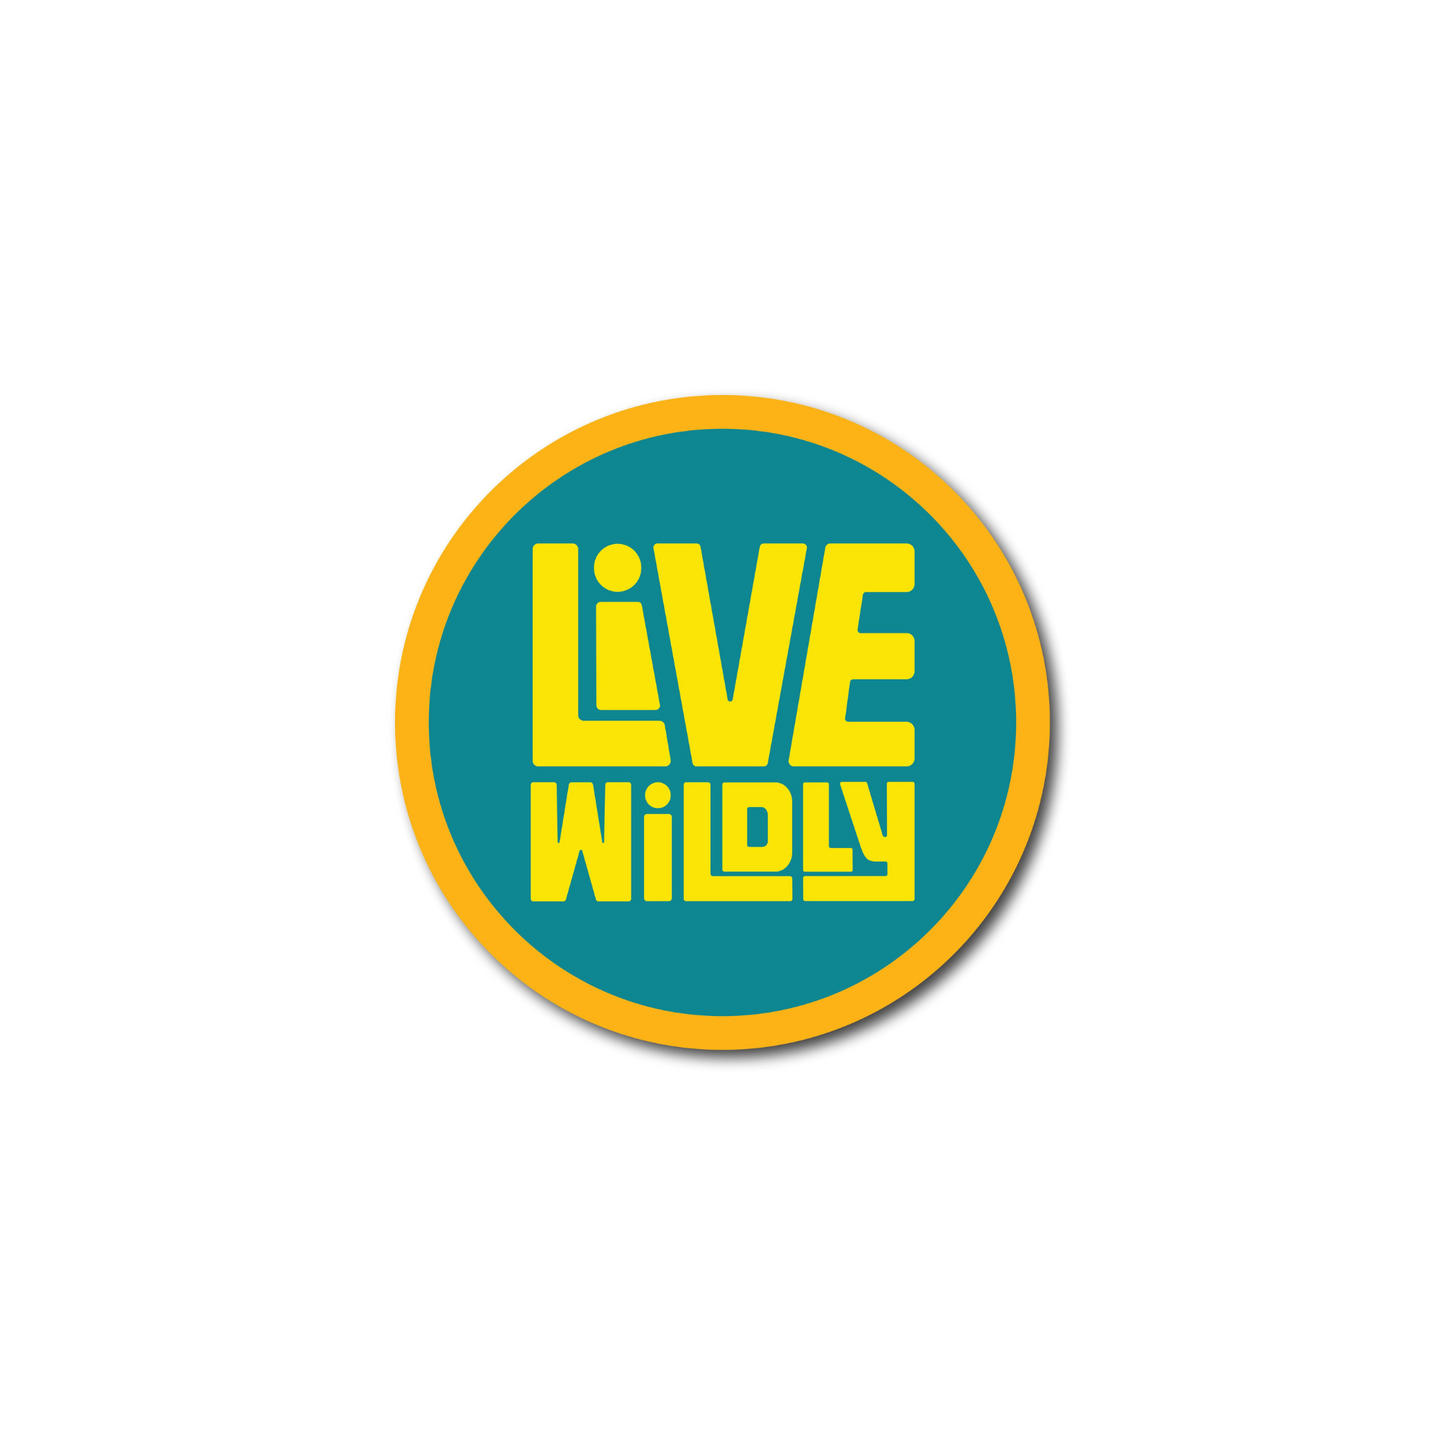 Live Wildly Round Stickers - Yellow And Teal - Live Wildly 